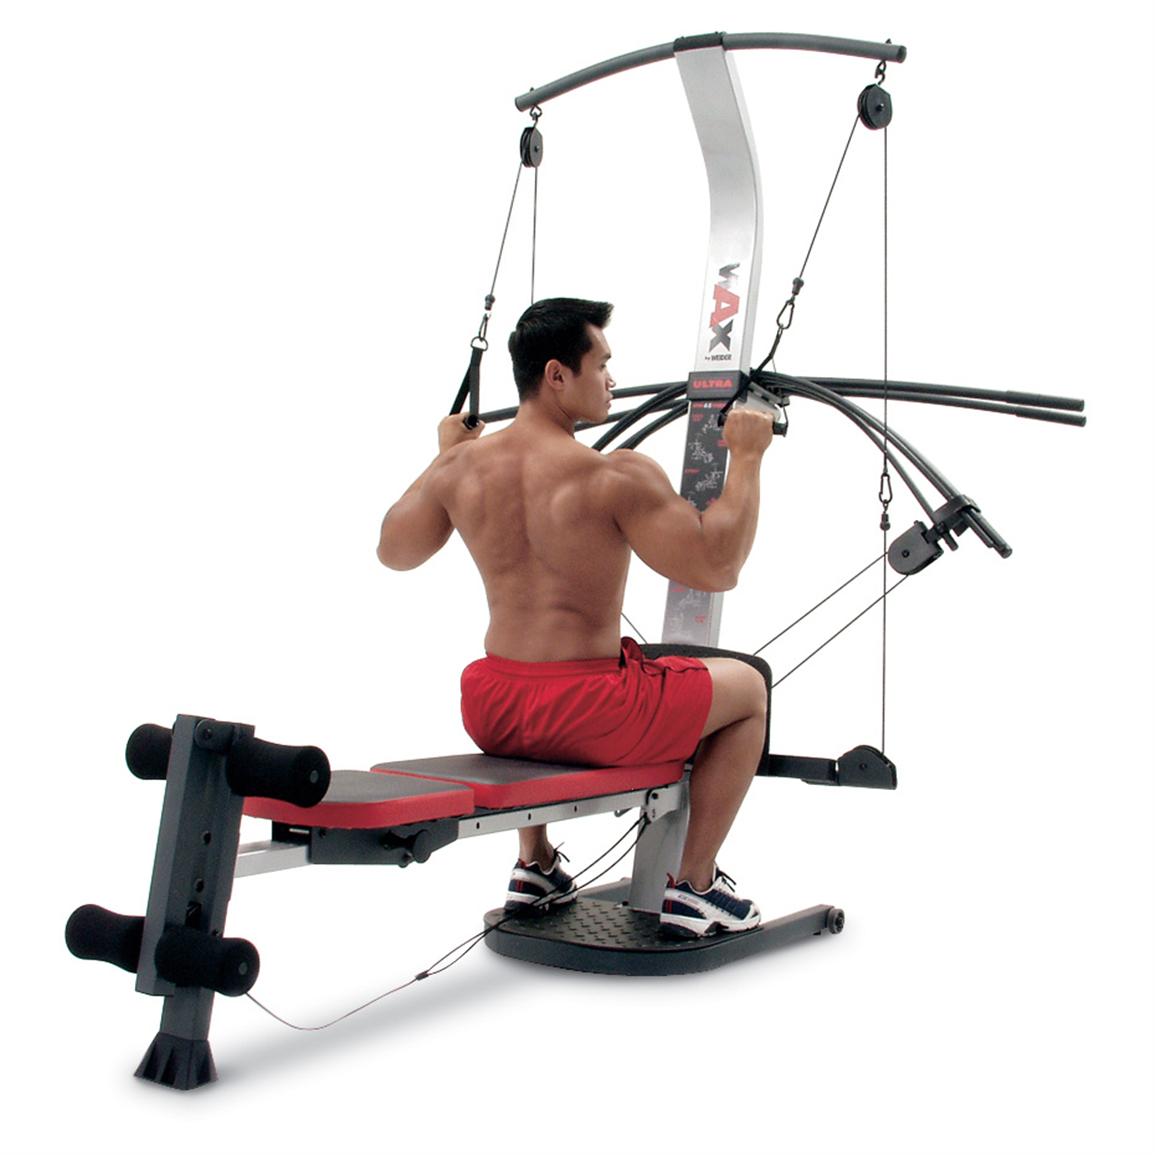 Weider Max Ultra Exercise Chart